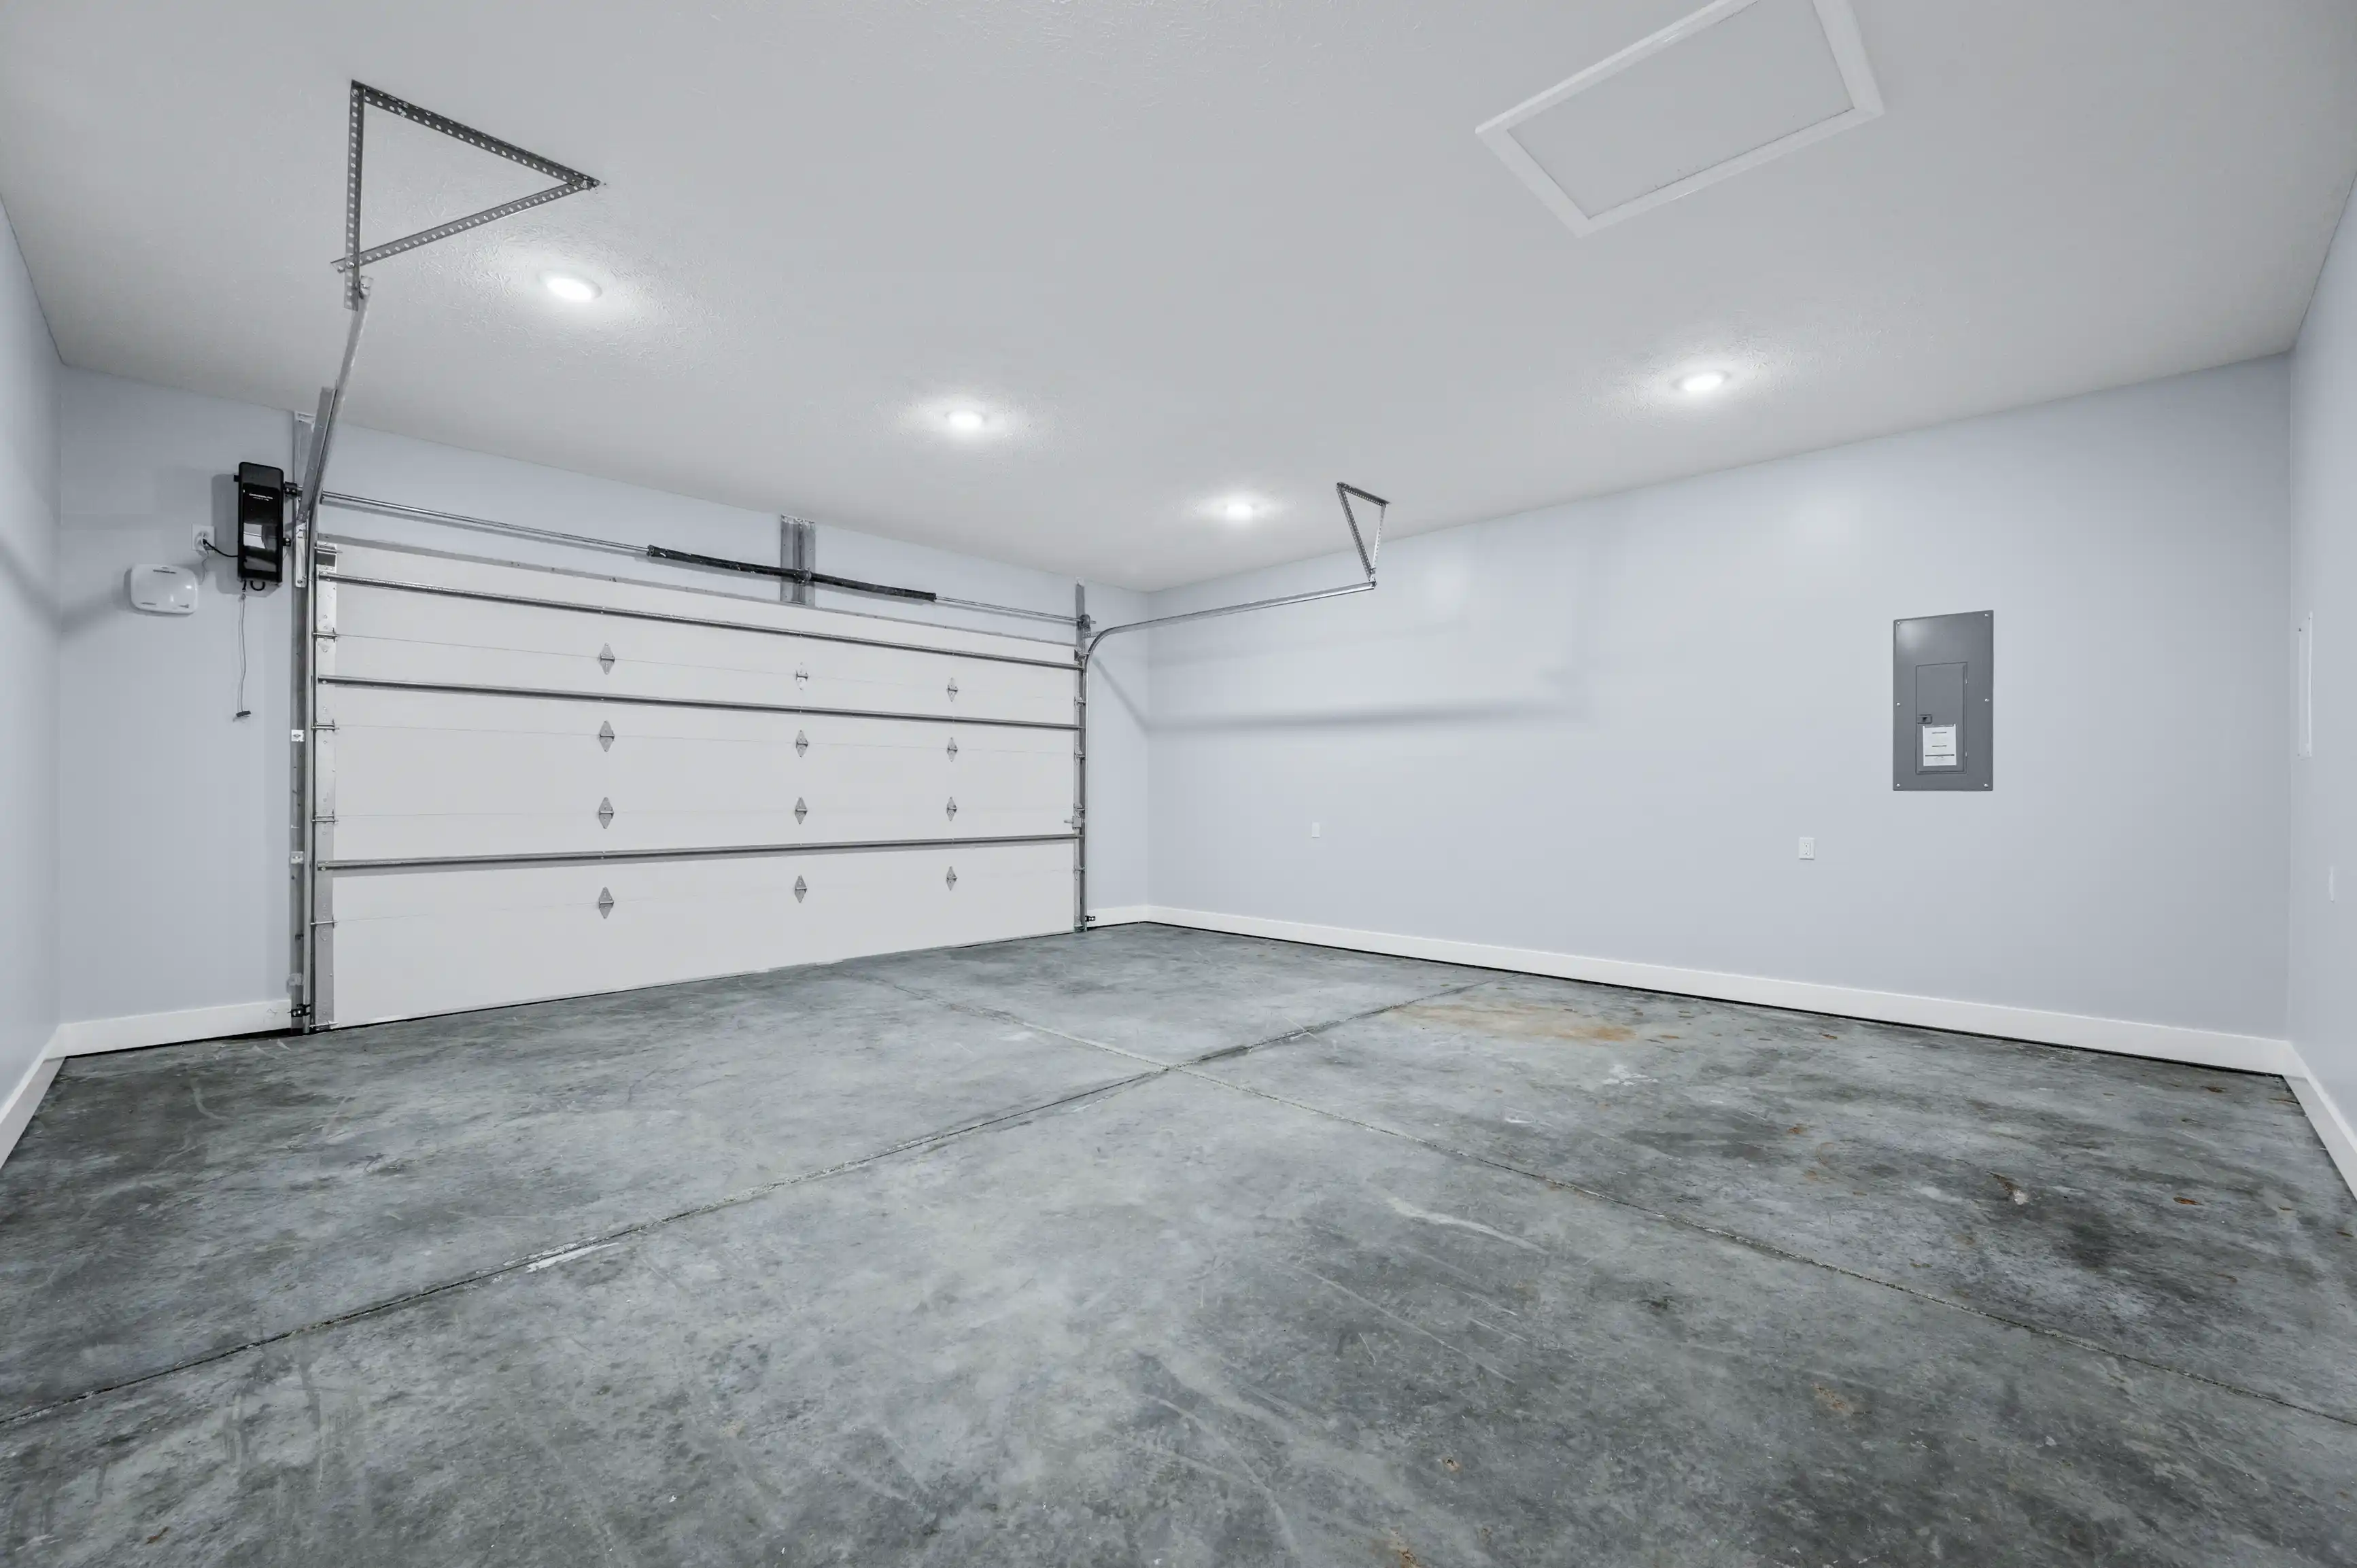 Empty two-car garage interior with a clean white wall and an automatic garage door.